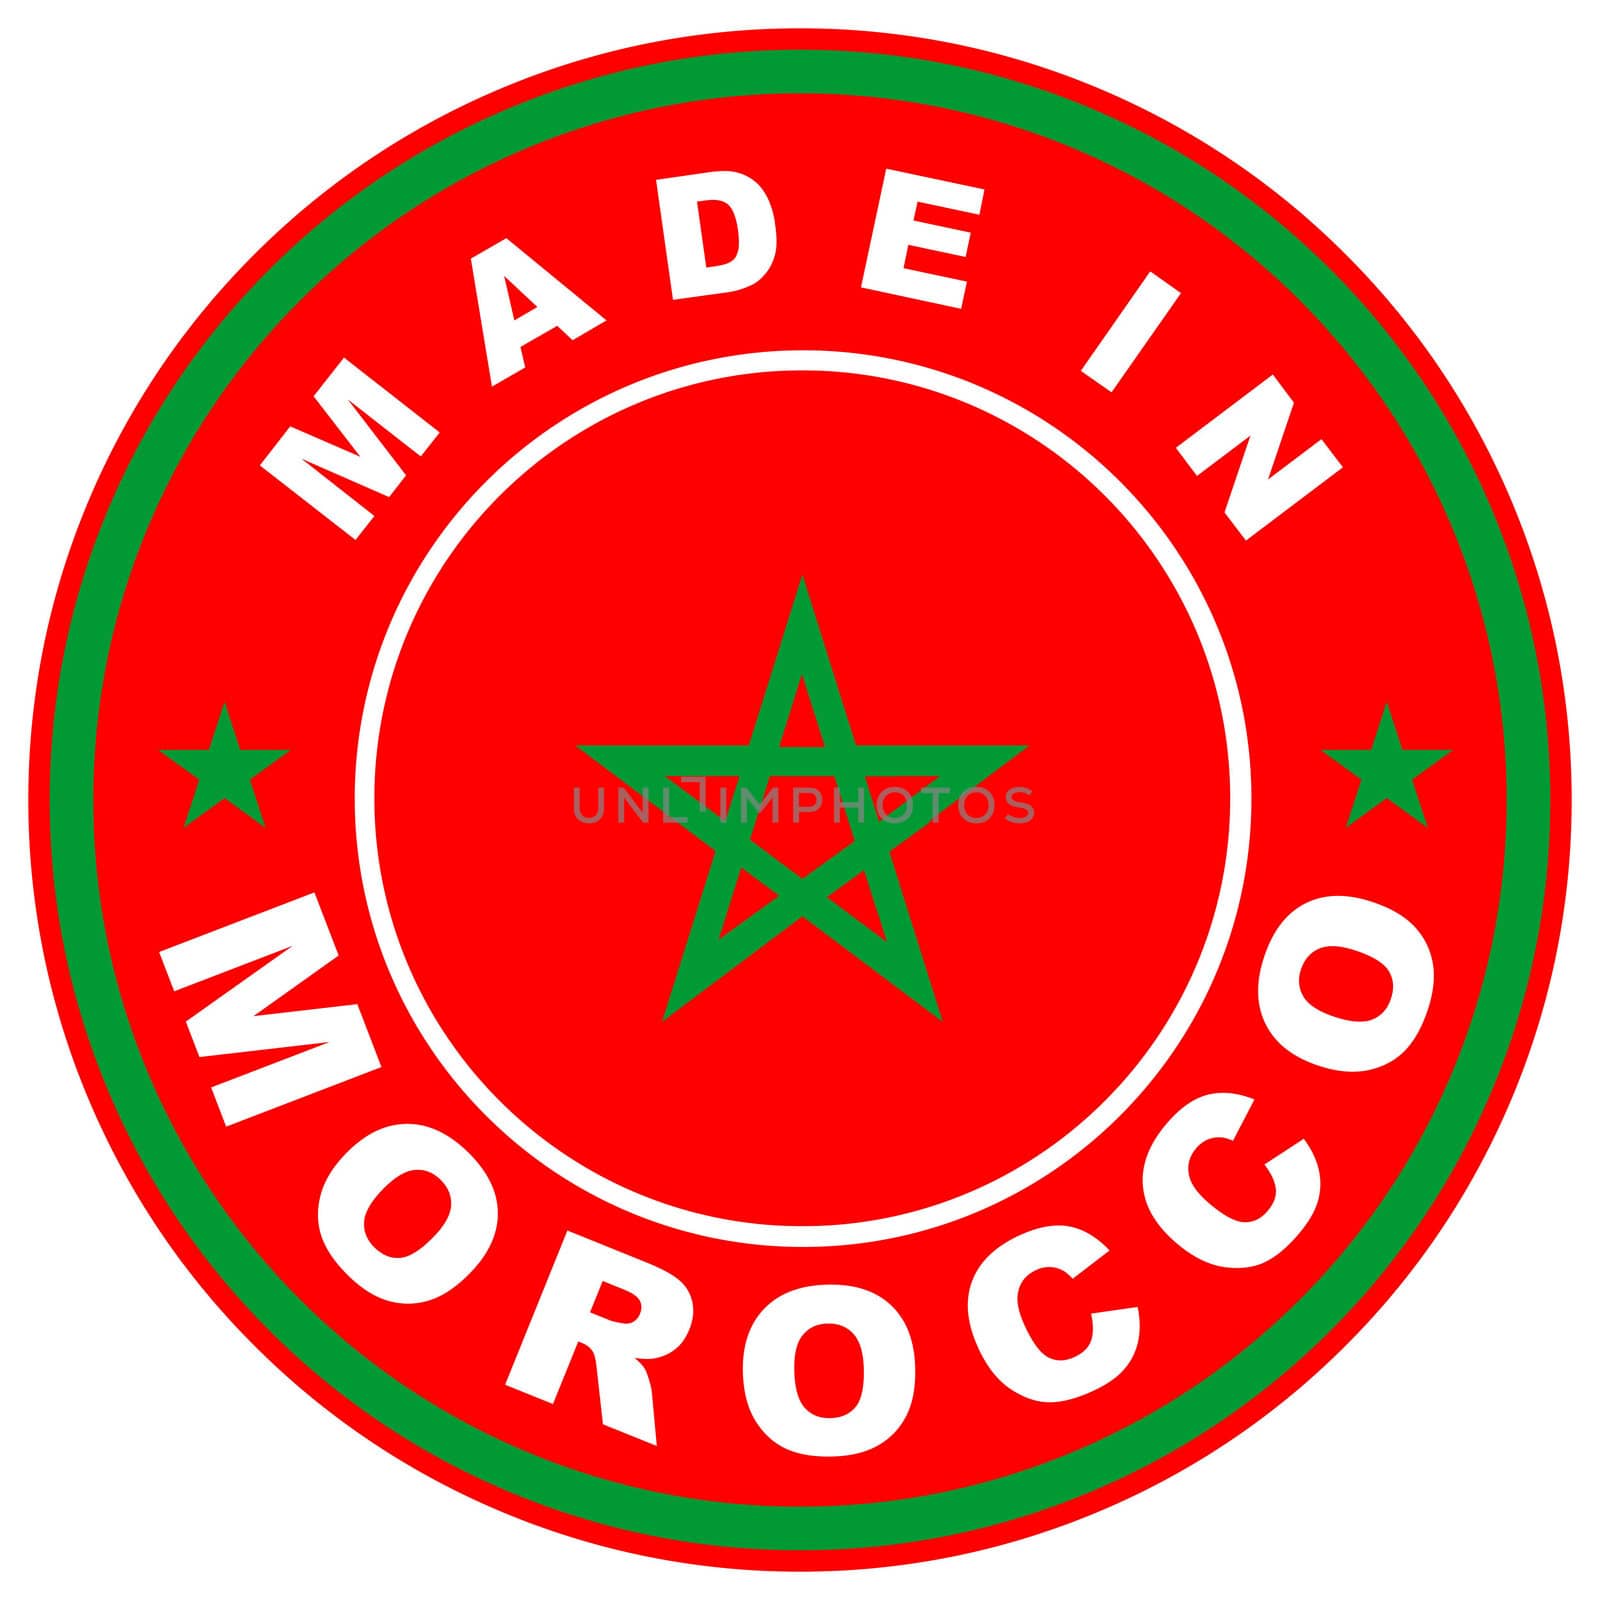 made in morocco by tony4urban